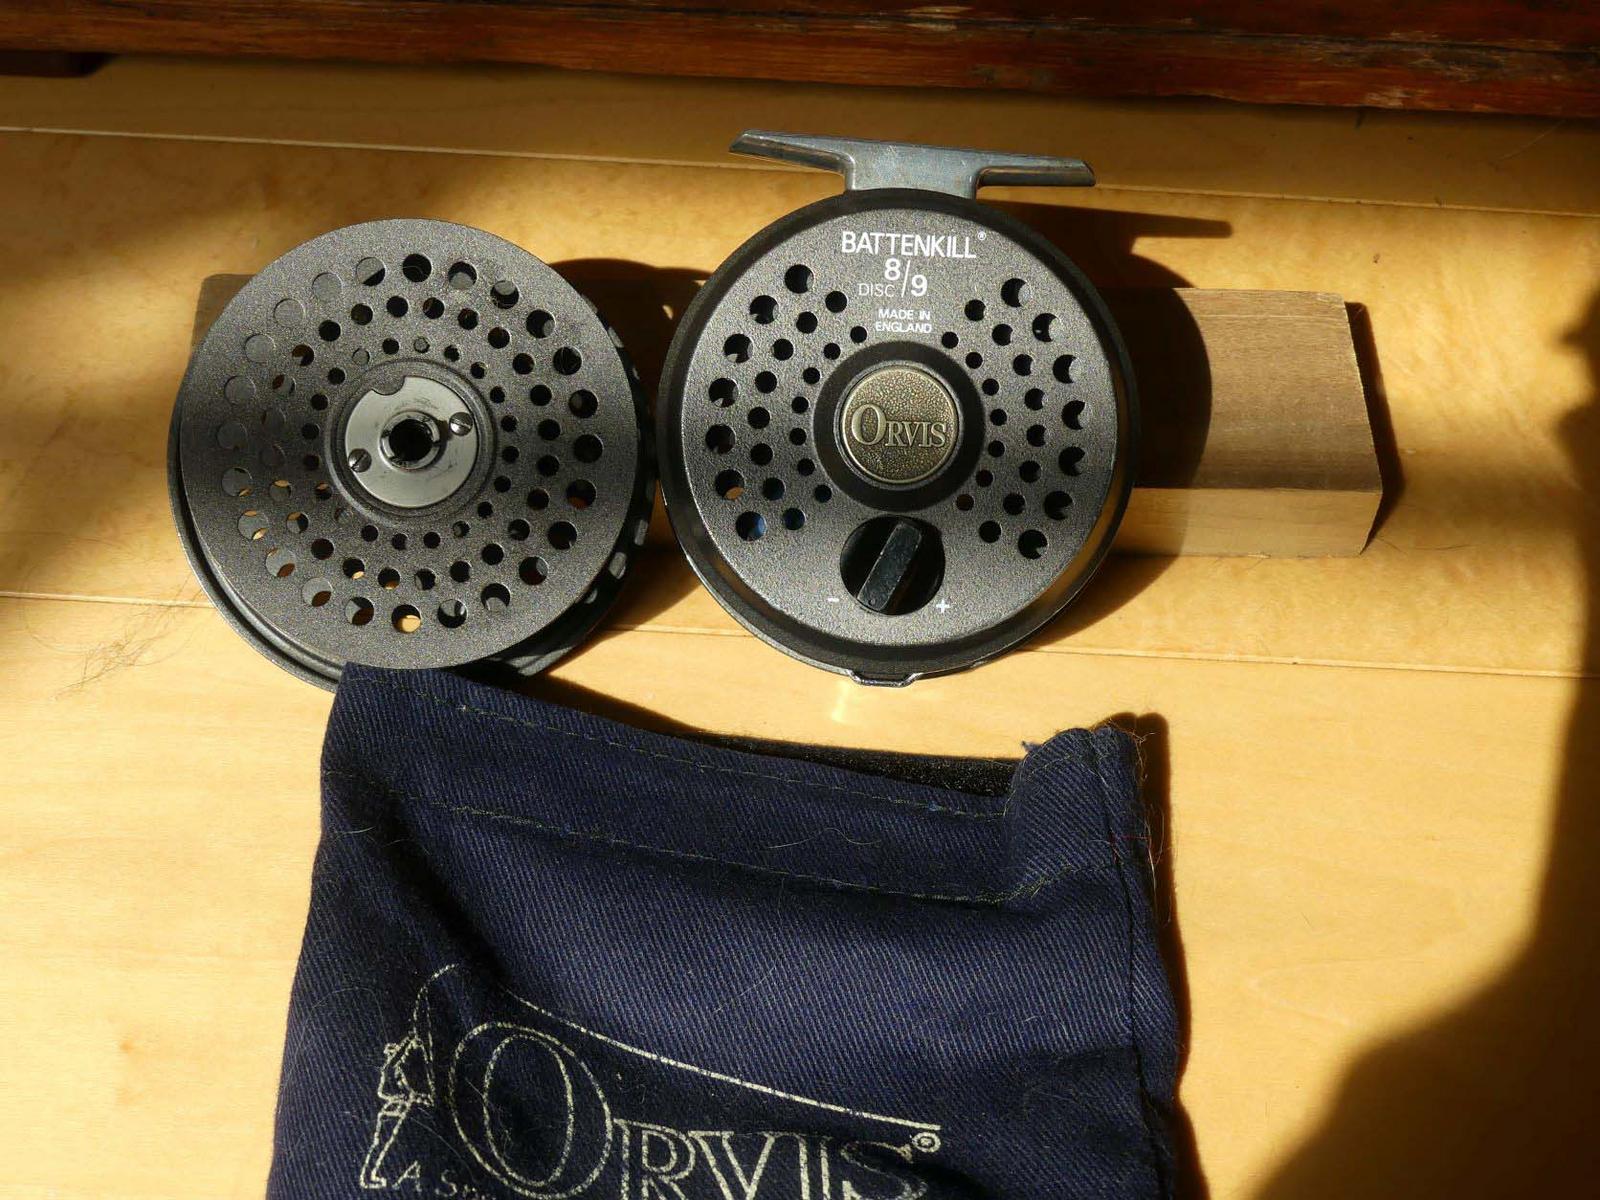 A SUPERB ORVIS BATTENKILL DISC #8/9 FLY REEL AND SPARE SPOOL IN 2